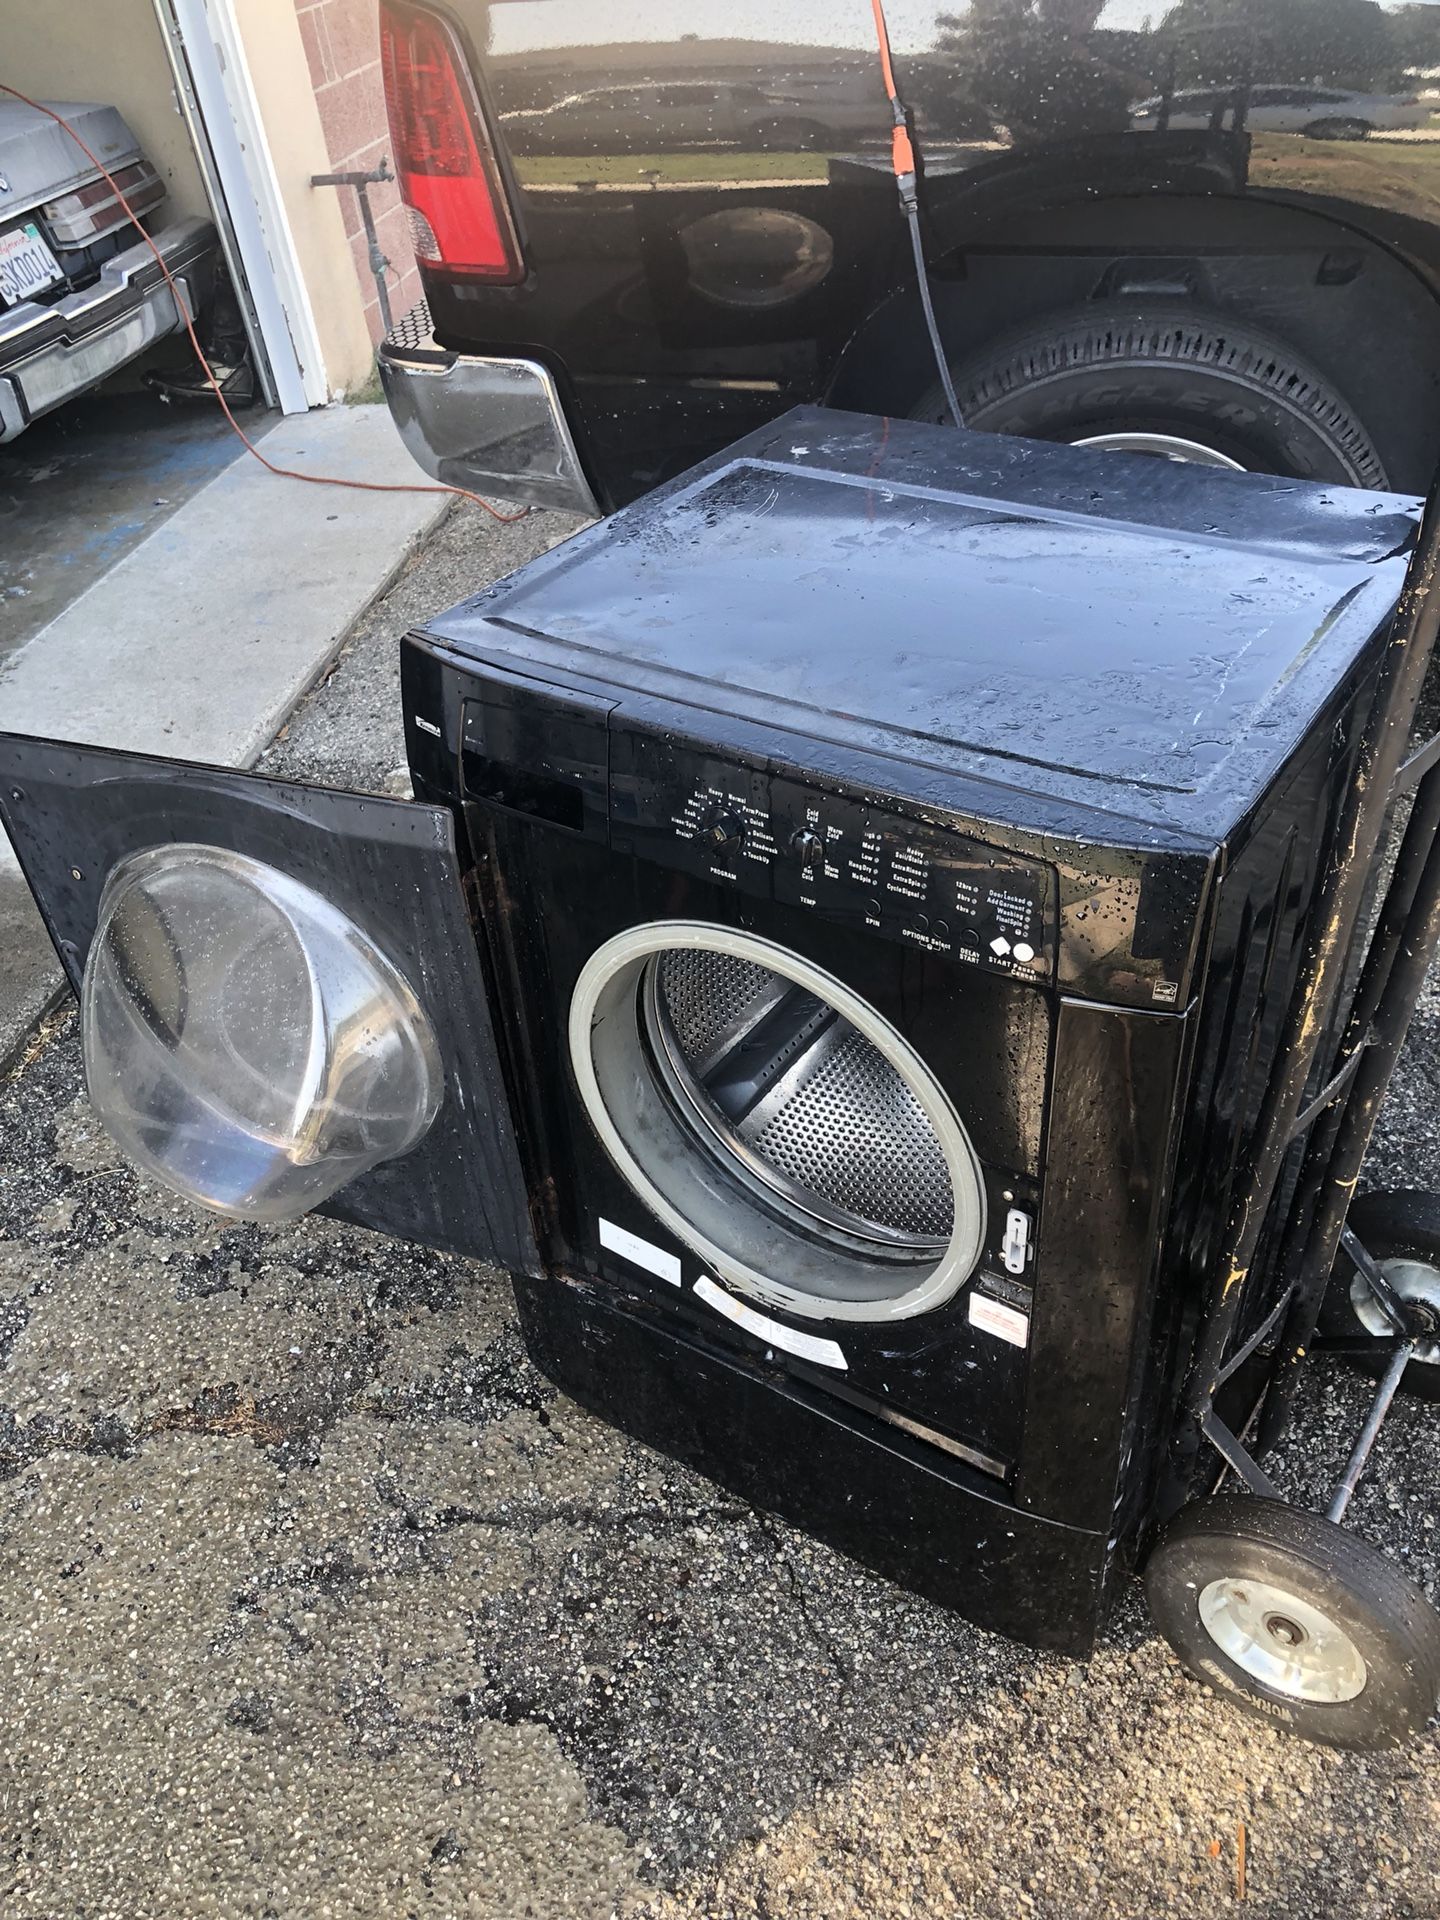 Kenmore washer $15